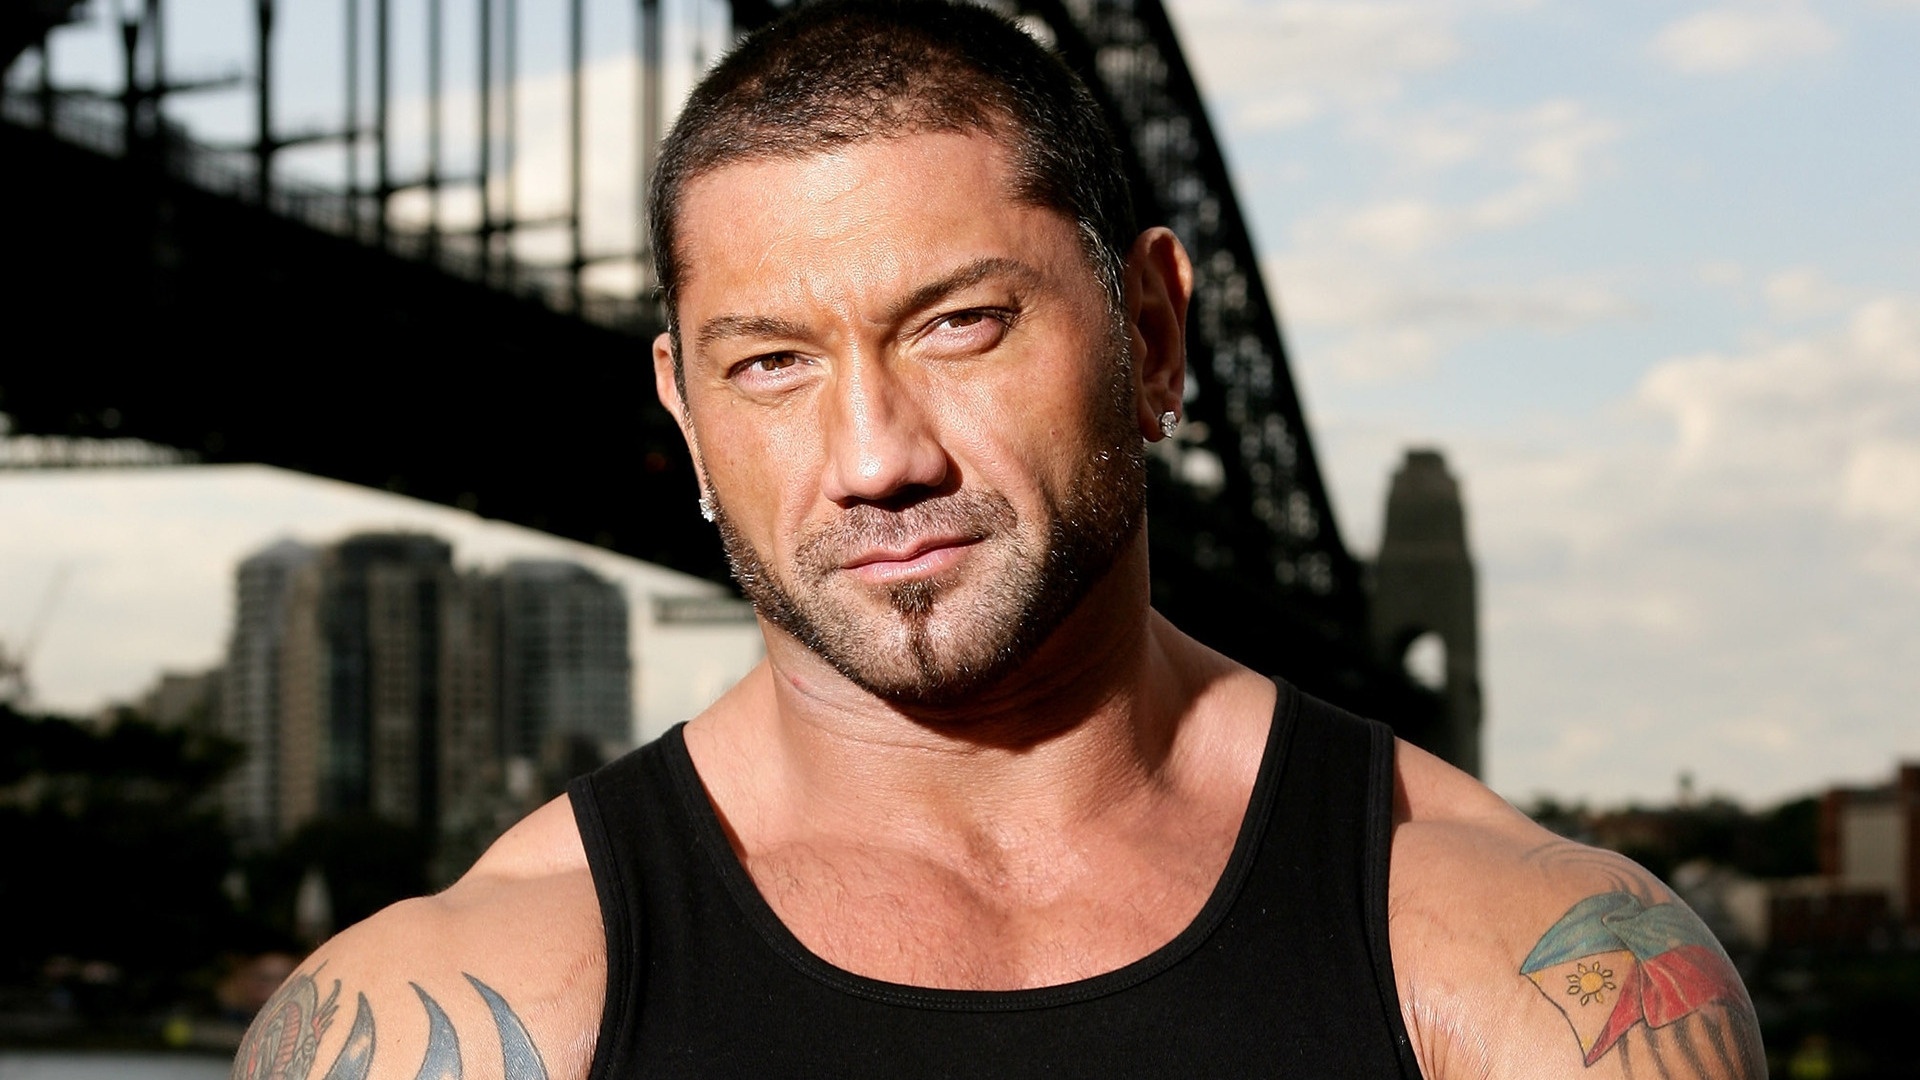 Dave Bautista, Top free wallpapers, Celebrity background, Quality download, 1920x1080 Full HD Desktop